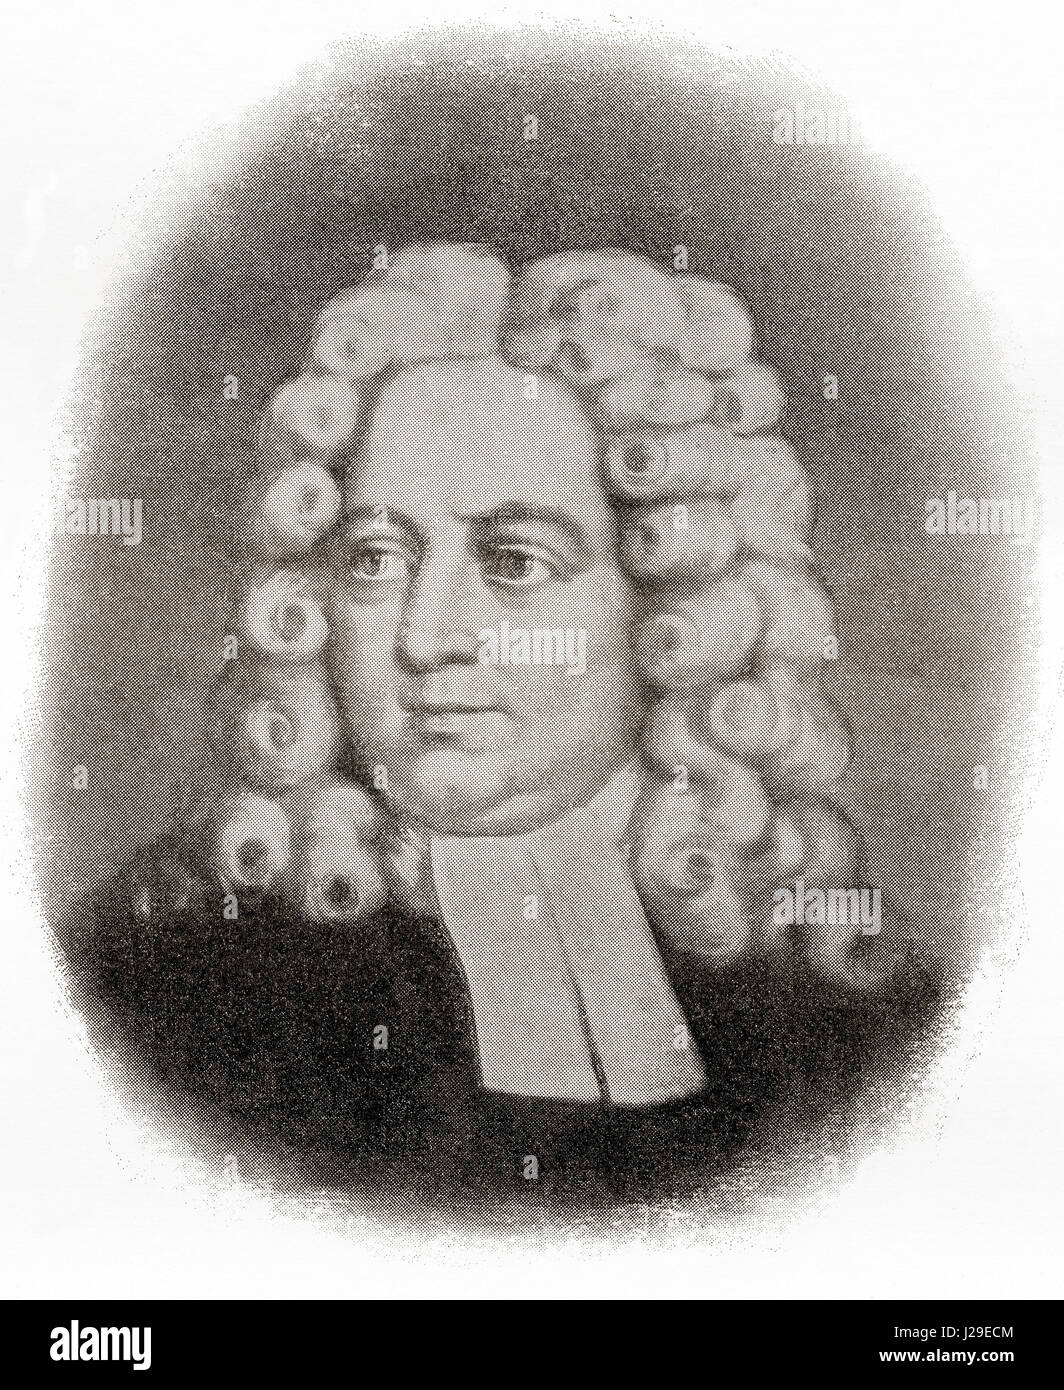 Jonathan Swift, 1667 – 1745.  Anglo-Irish satirist, essayist, political pamphleteer (first for the Whigs, then for the Tories), poet and cleric who became Dean of St Patrick's Cathedral, Dublin, Ireland.  From The International Library of Famous Literature, published c. 1900 Stock Photo